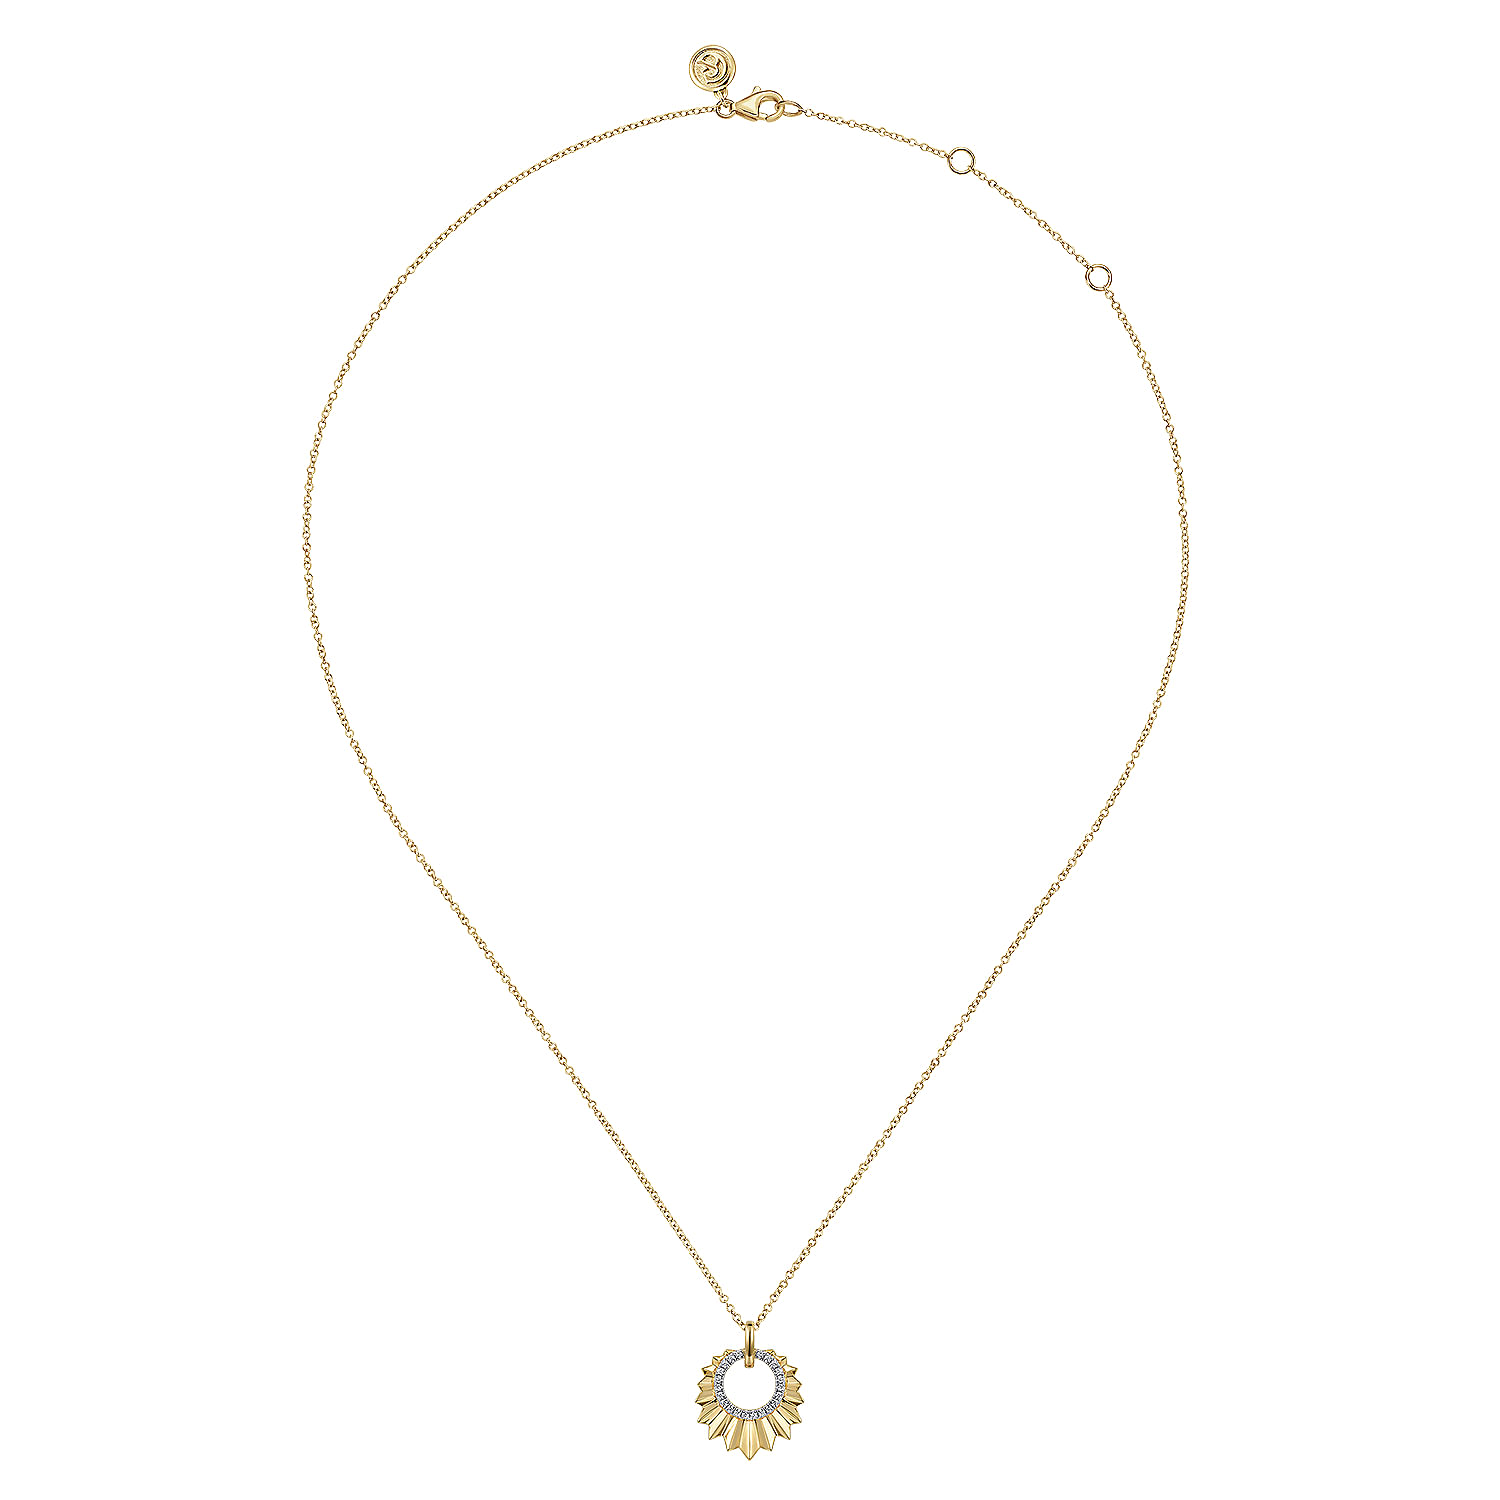 14K Yellow Gold 17 5 inch Diamond Necklace With Diamond Cut Texture In Leaf Shape